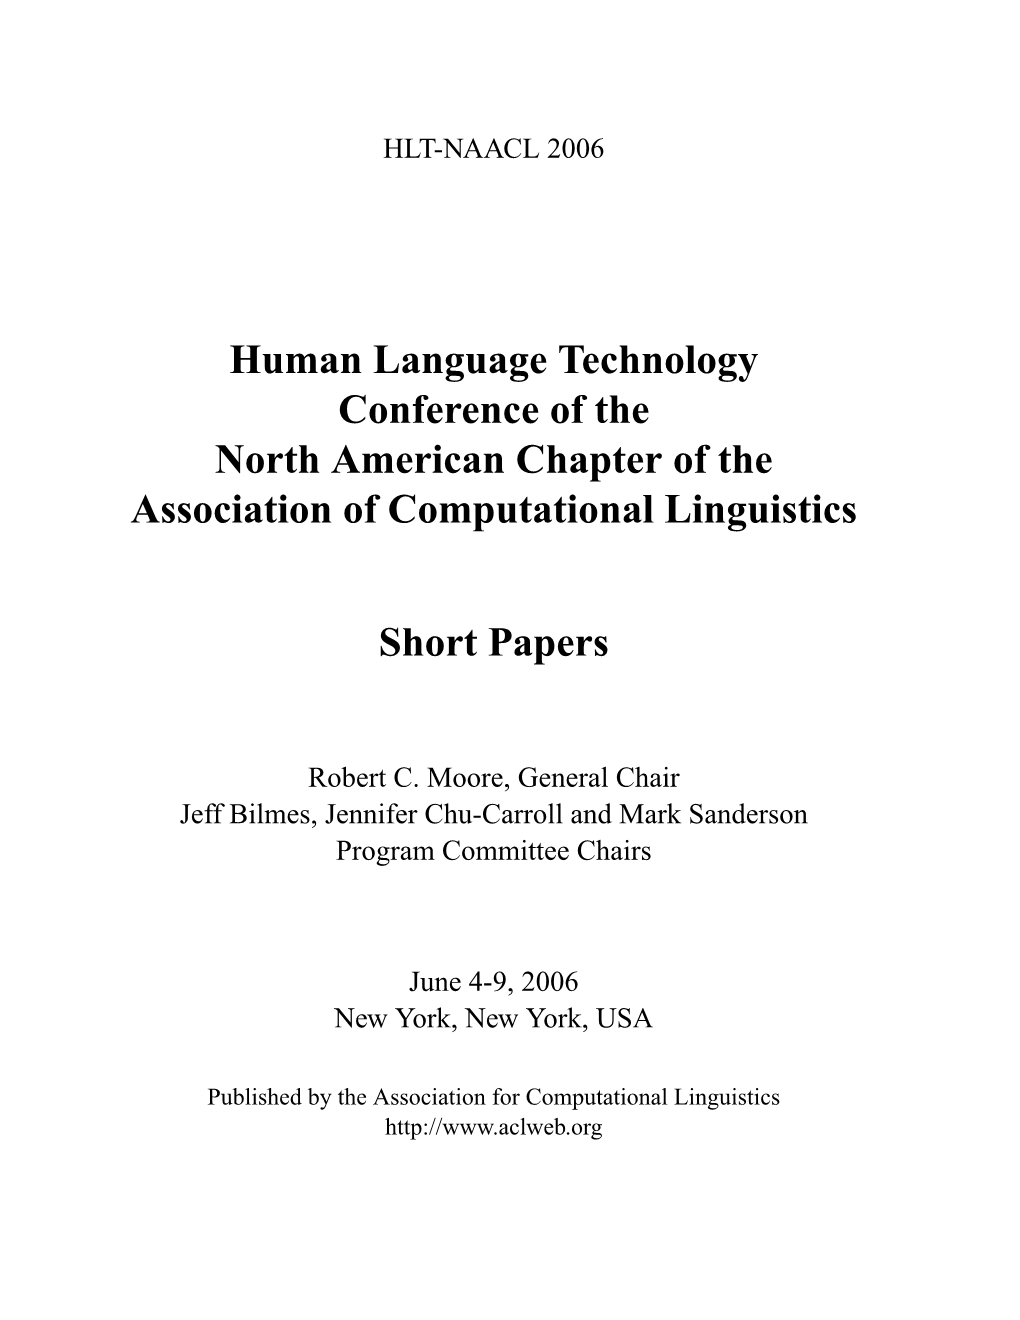 Human Language Technology Conference of the North American Chapter of the Association of Computational Linguistics Short Papers